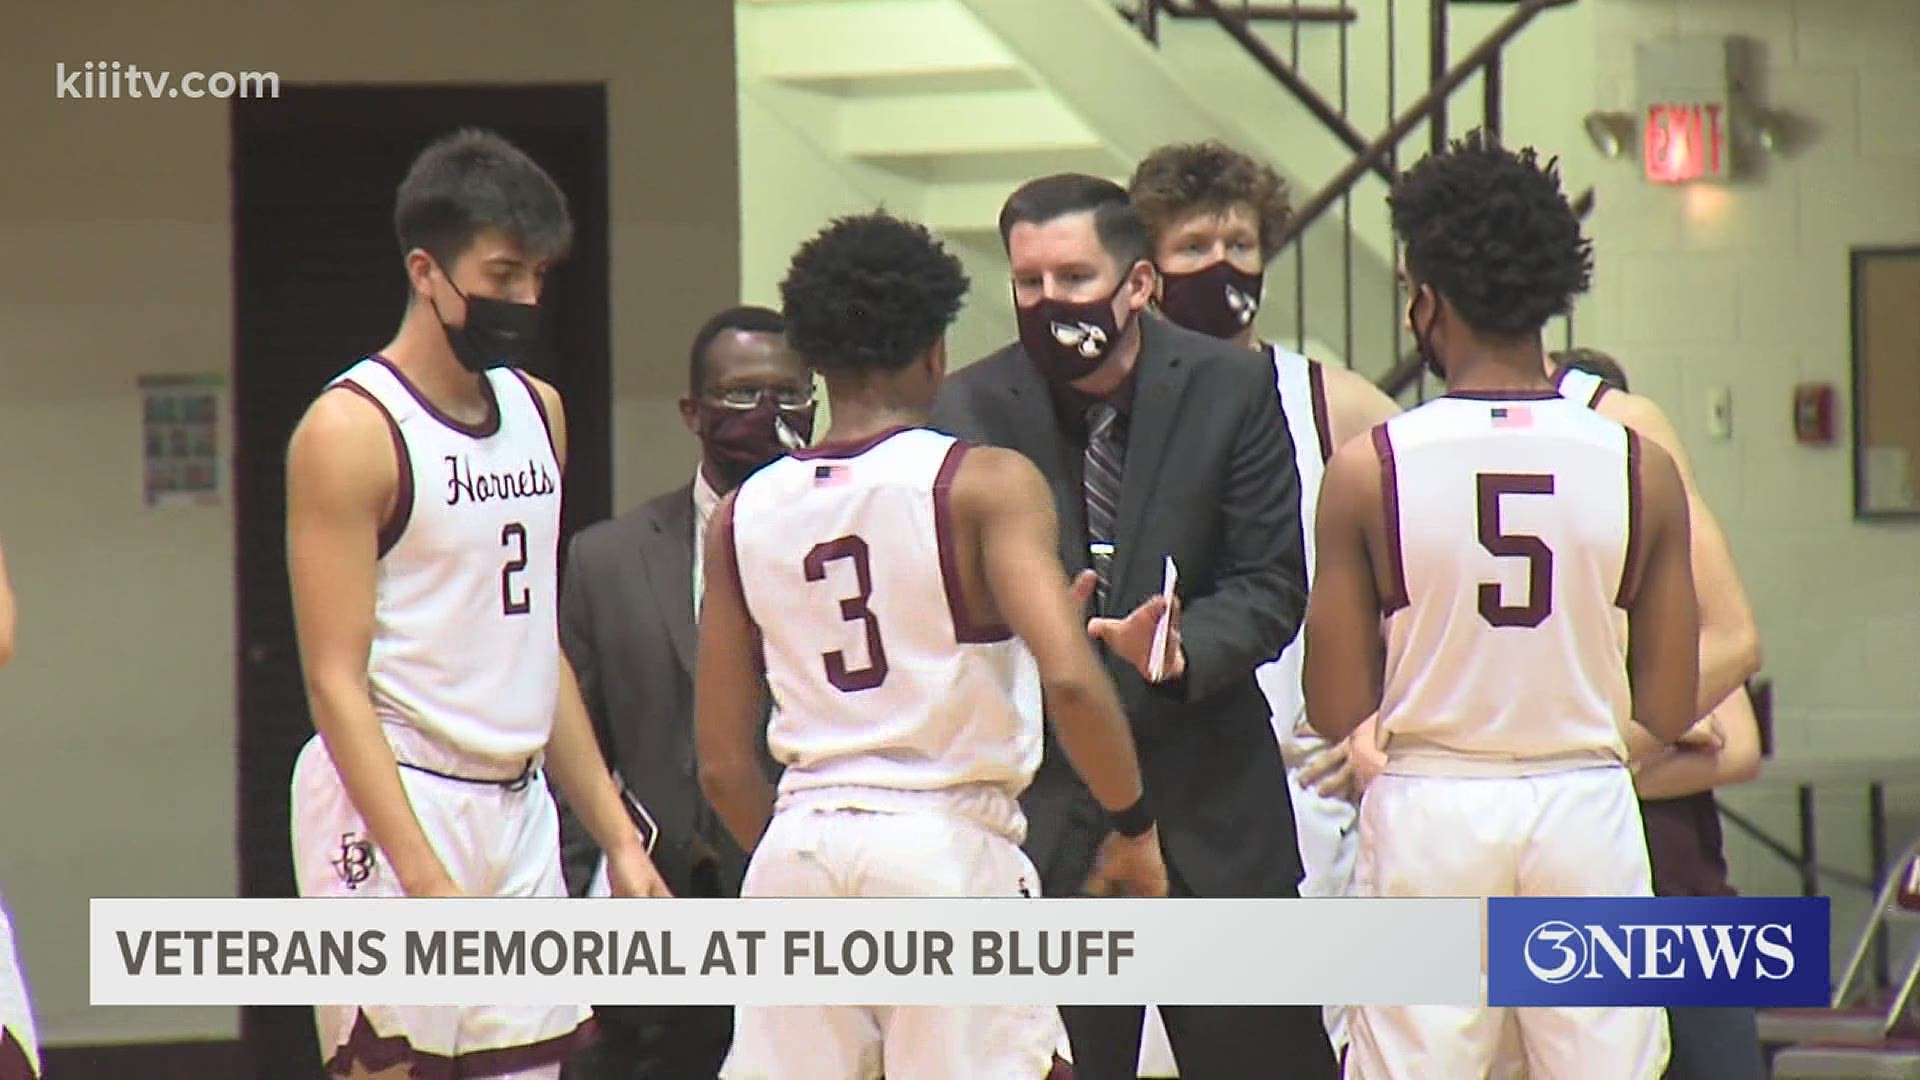 The Flour Bluff boys knocked off Veterans Memorial 92-46 while the Vets girls beat the Lady Hornets 46-37 before the two schools face off on the football field Sat.